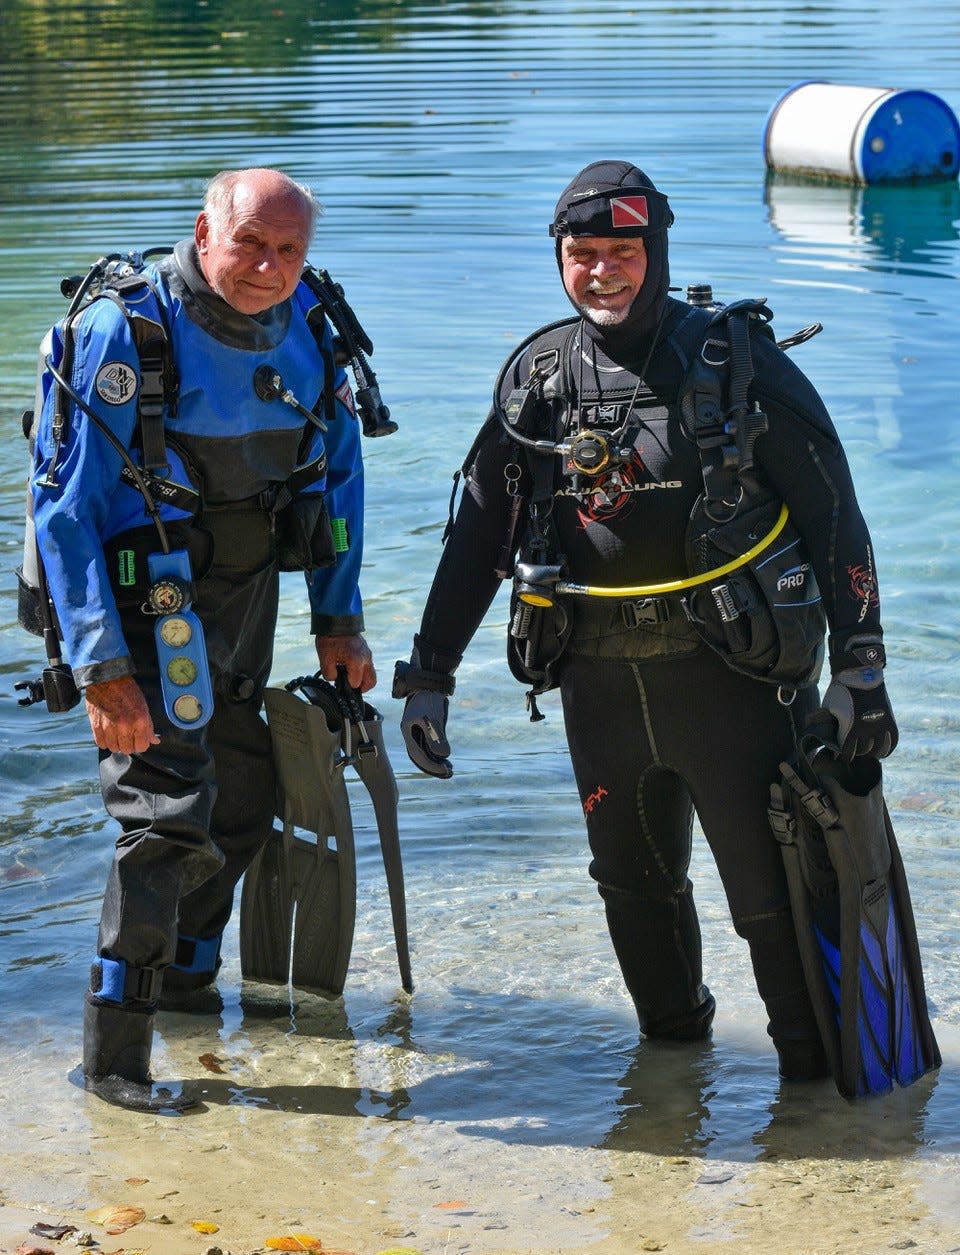 Ron Smith, left, and Craig Whitaker, both members of Bay Area Divers, get suited up for a dive at White Star Quarry in Gibsonburg on Oct. 2.